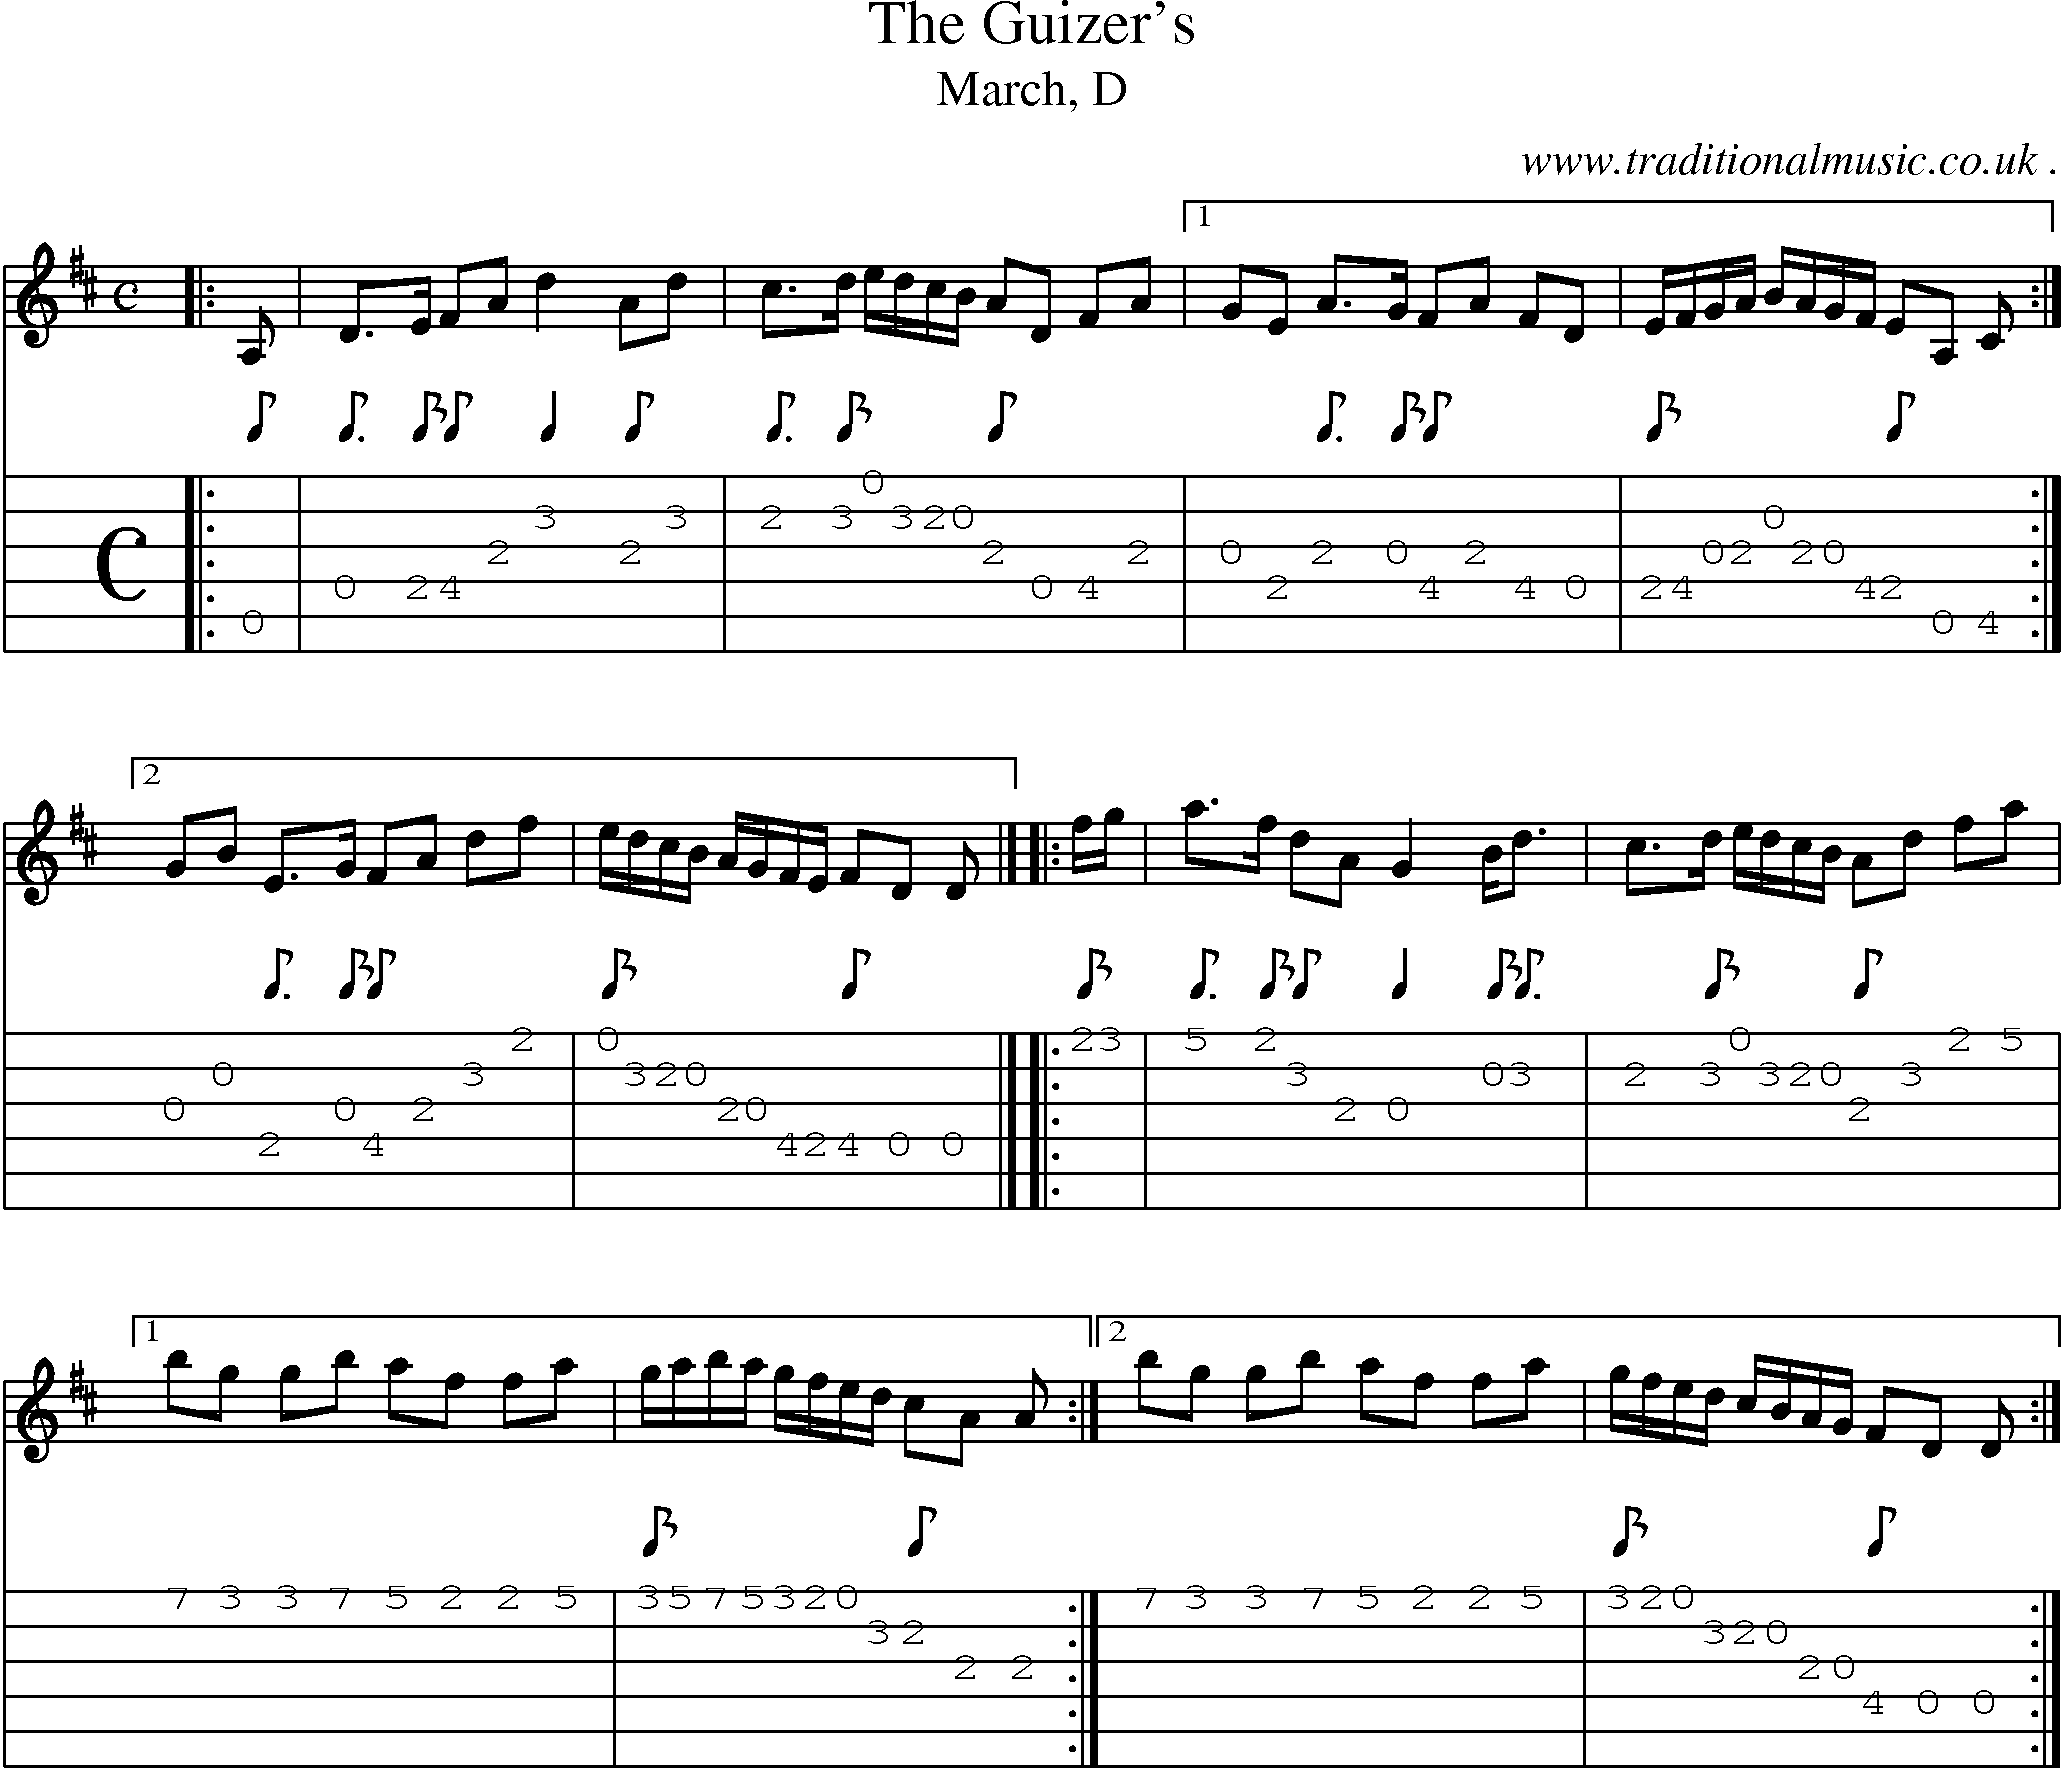 Sheet-music  score, Chords and Guitar Tabs for The Guizers